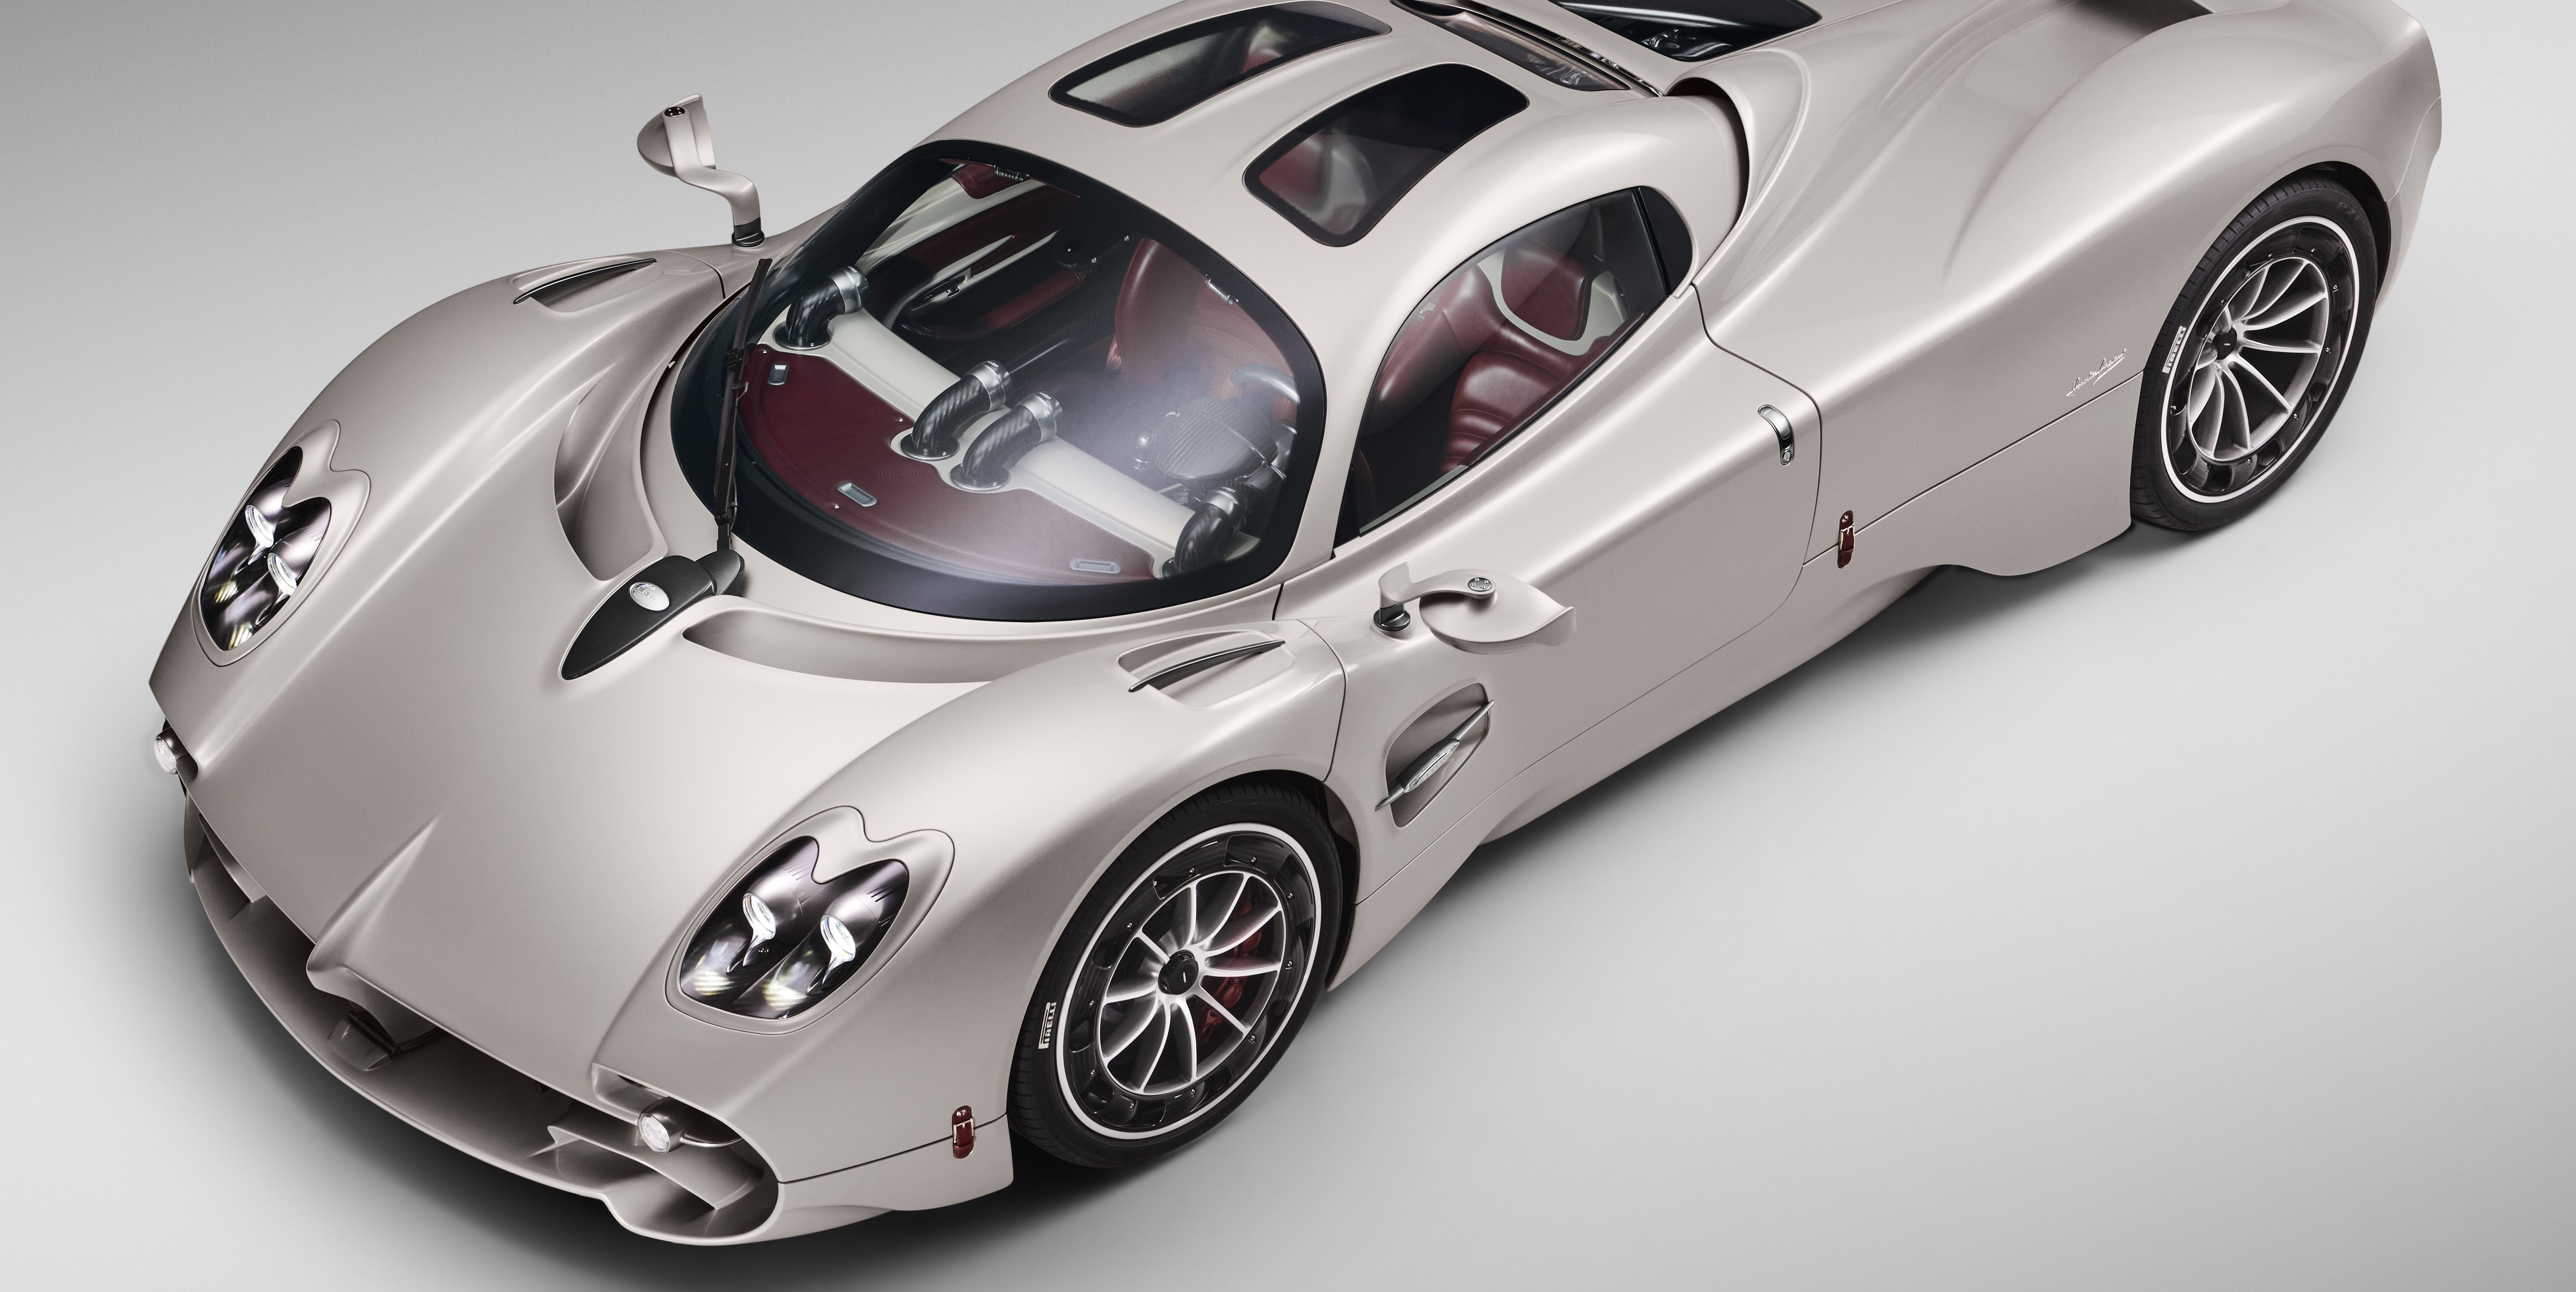 Pagani Finally Has an Entirely New Hypercar and It's Bringing Back the Manual